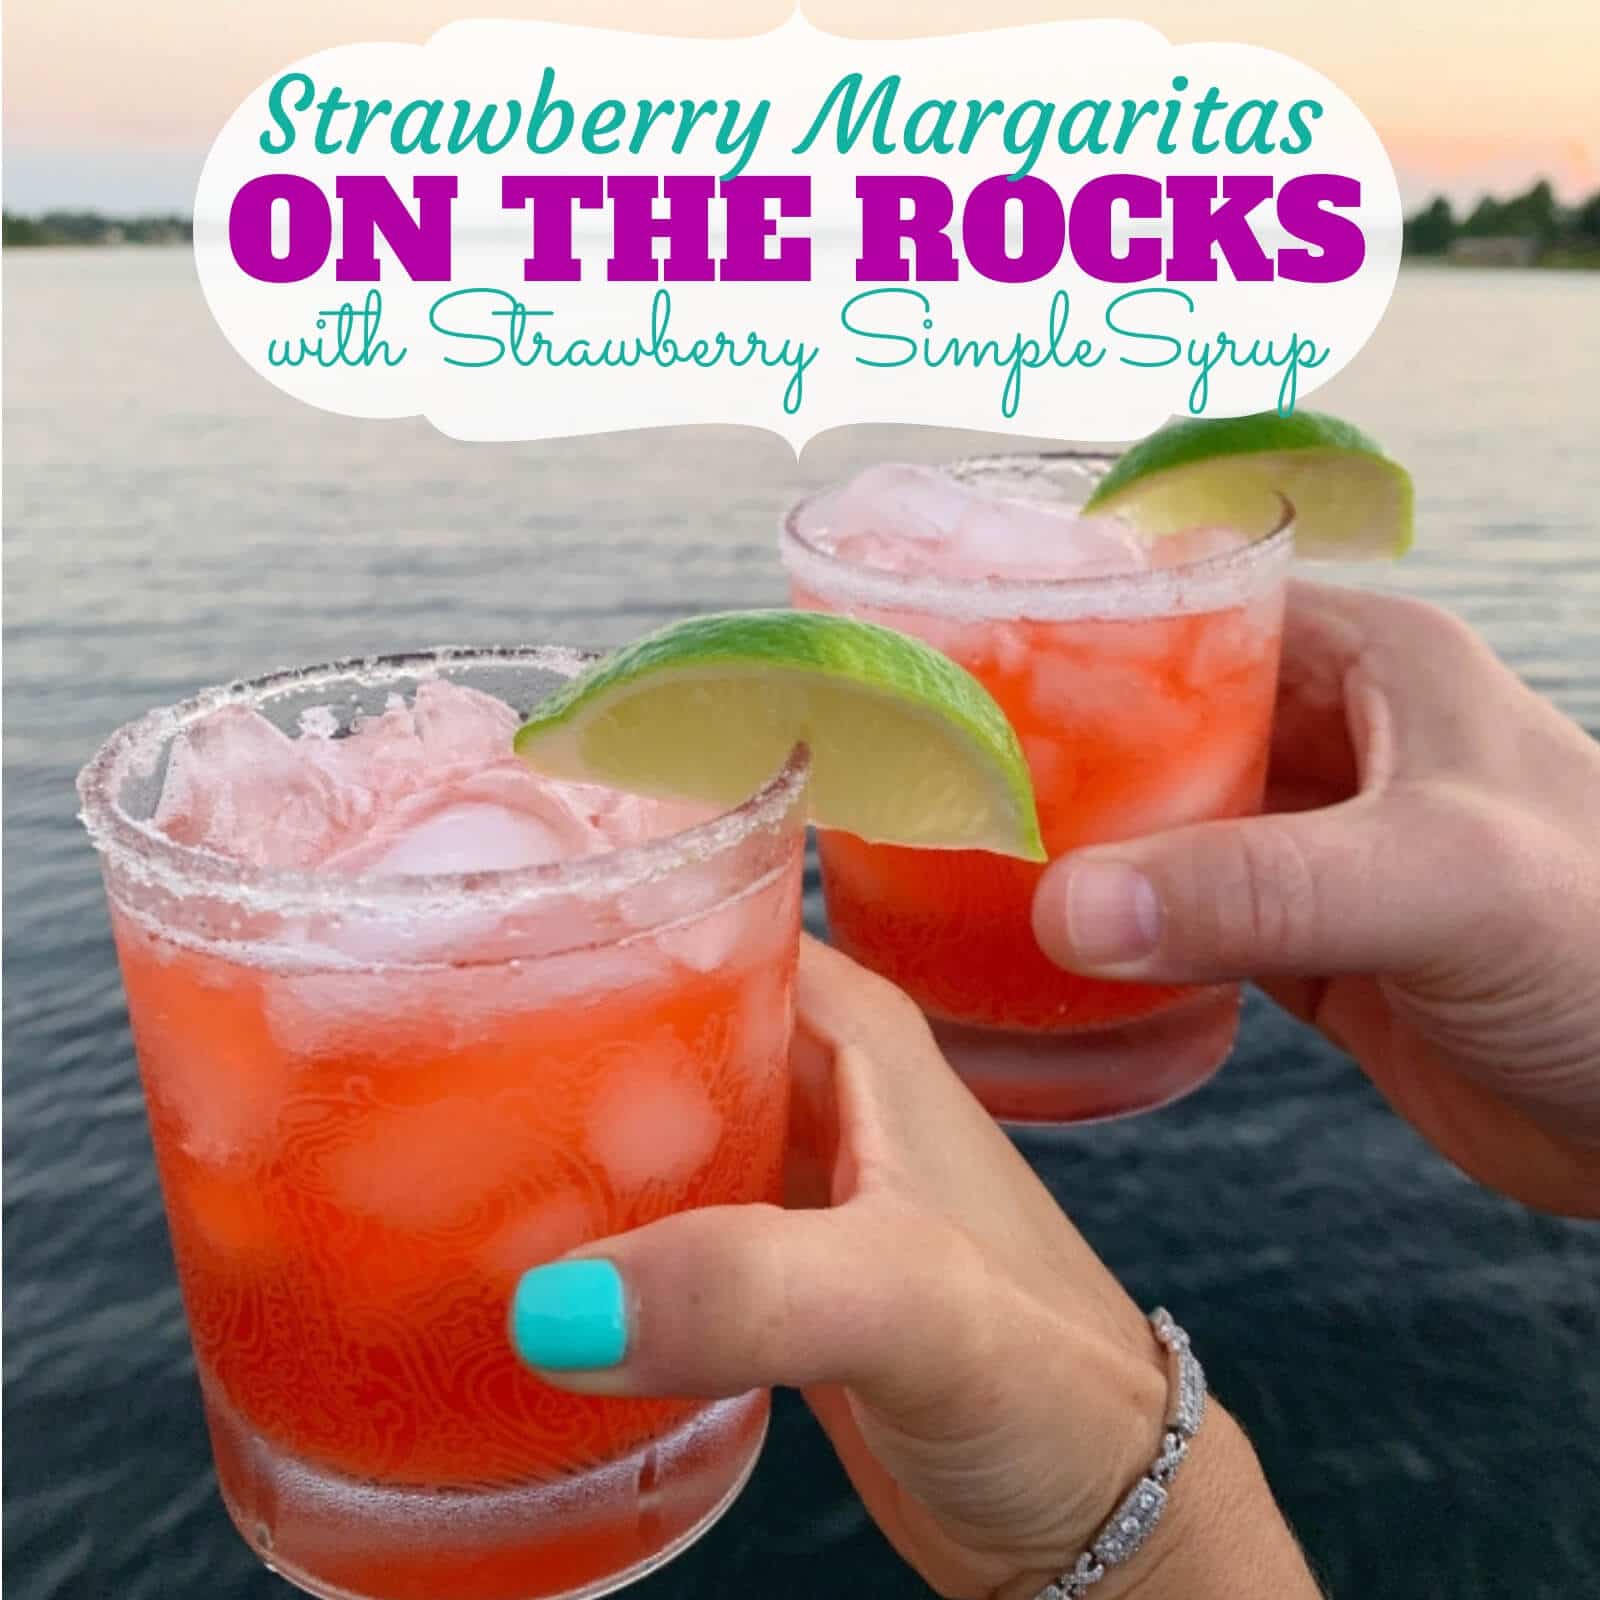 How to Make Easy Strawberry Margaritas on the Rocks